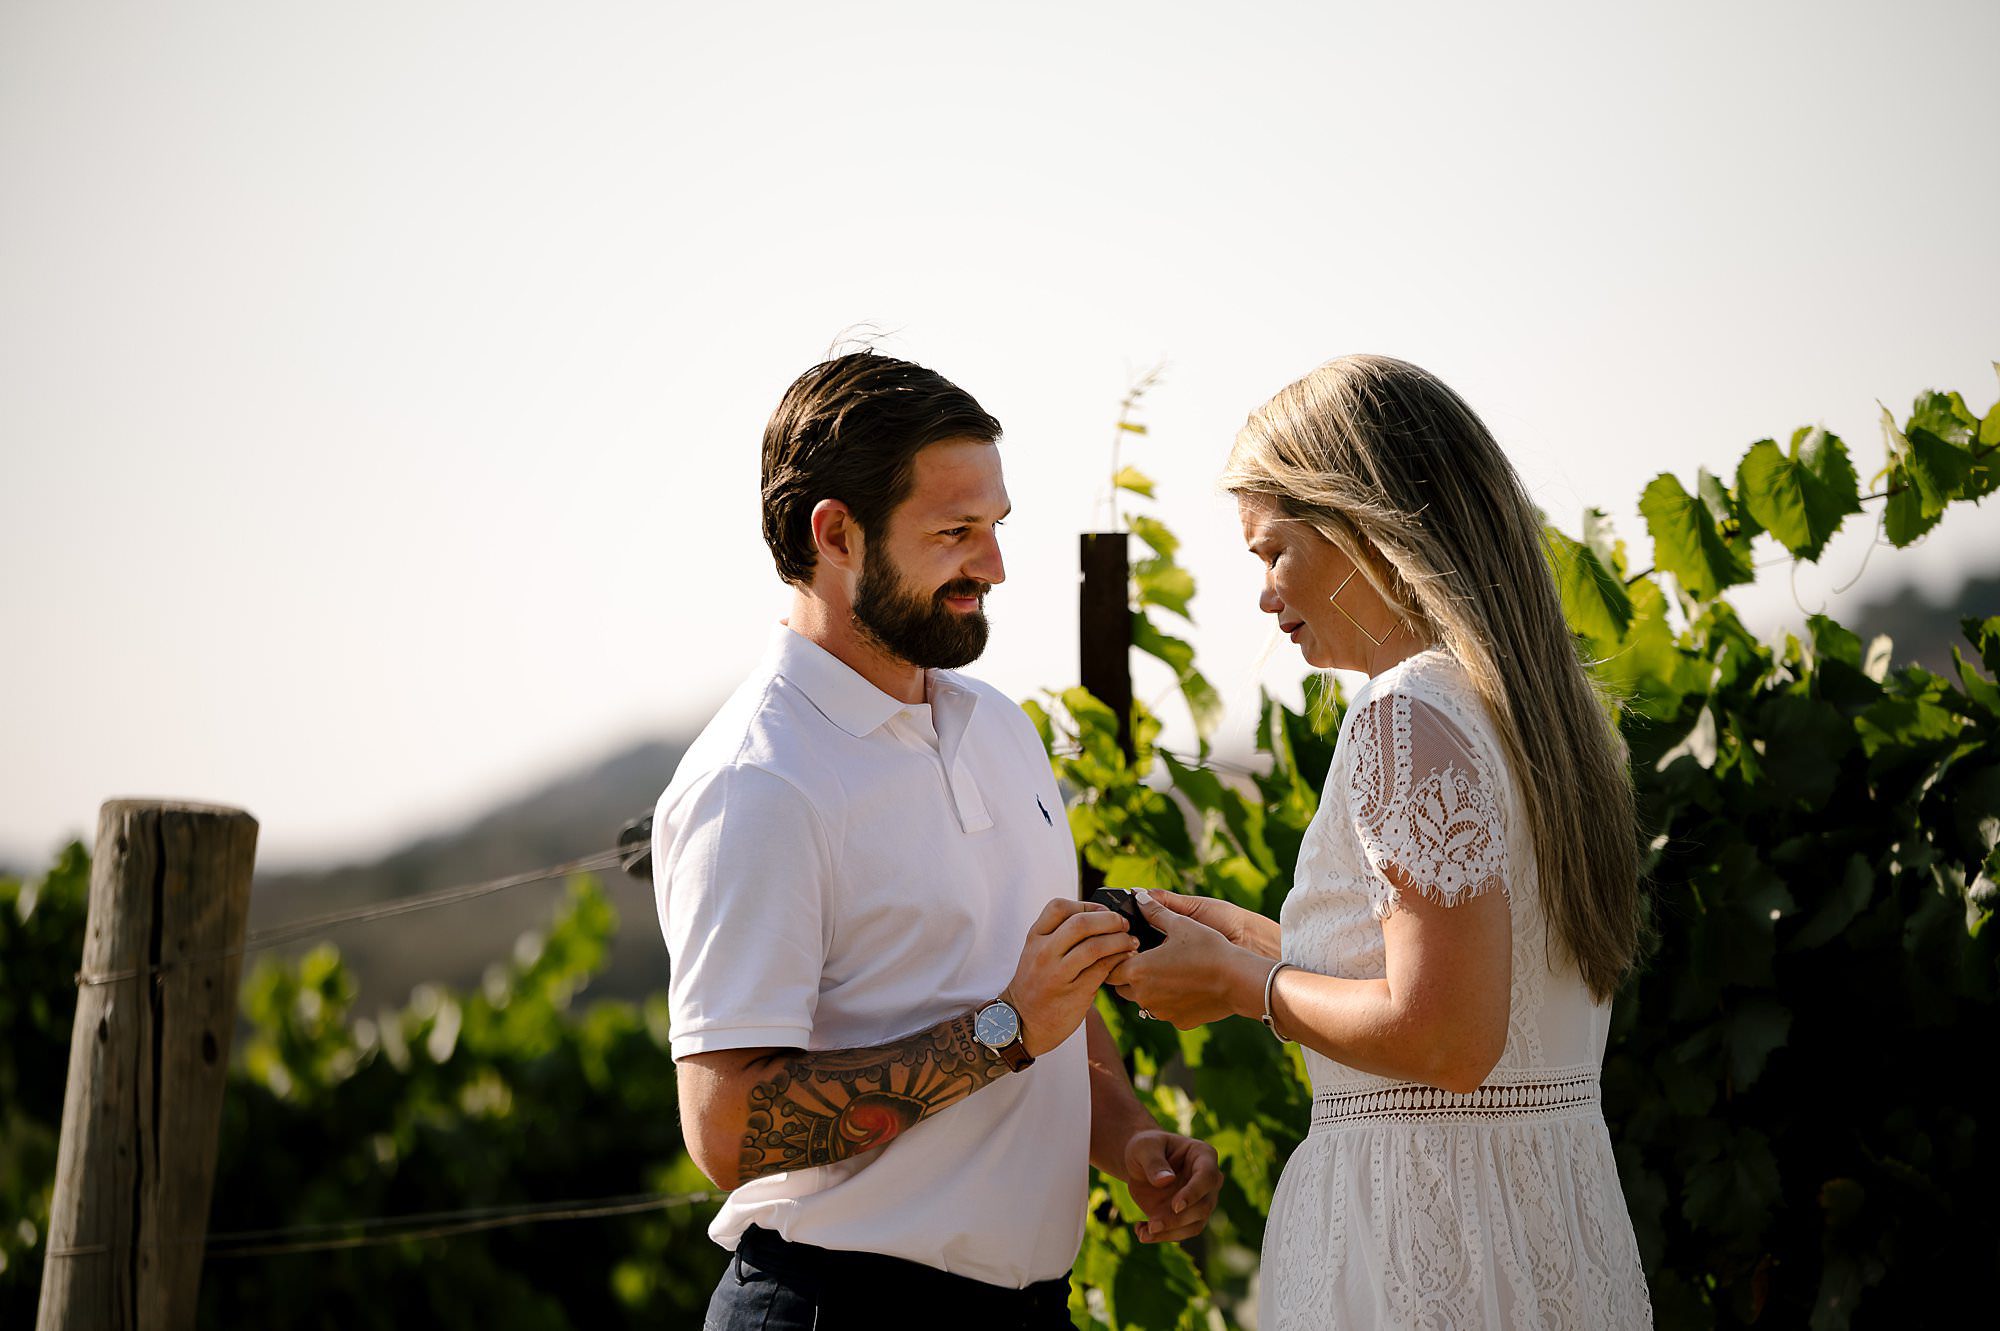 Cameron shows Melissa the ring box after proposing in the vineyard after proposal at Domaine Carneros in Napa.